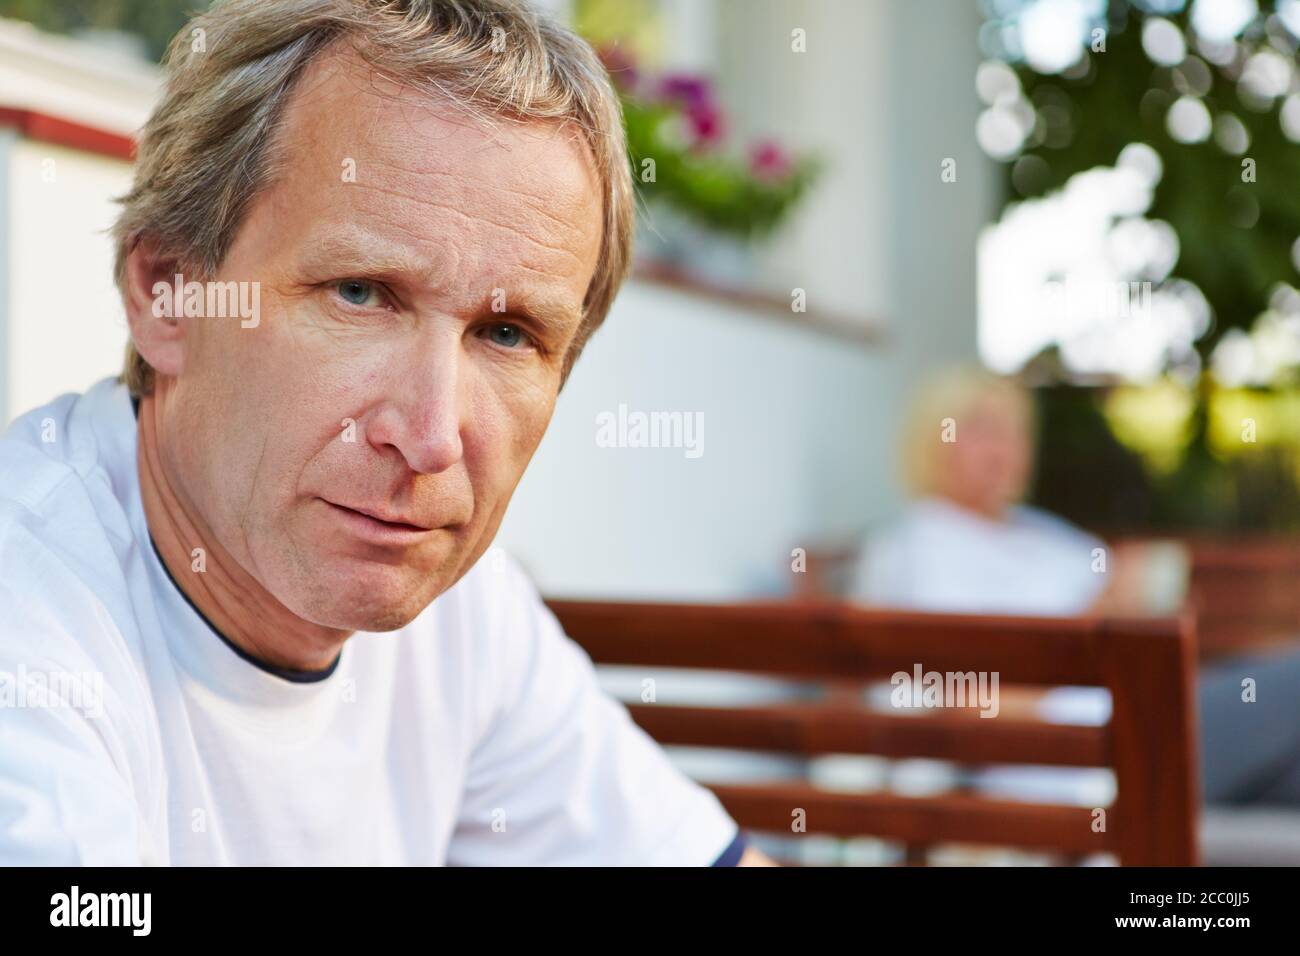 Old man sits in front of his house in summer and looks serious Stock Photo